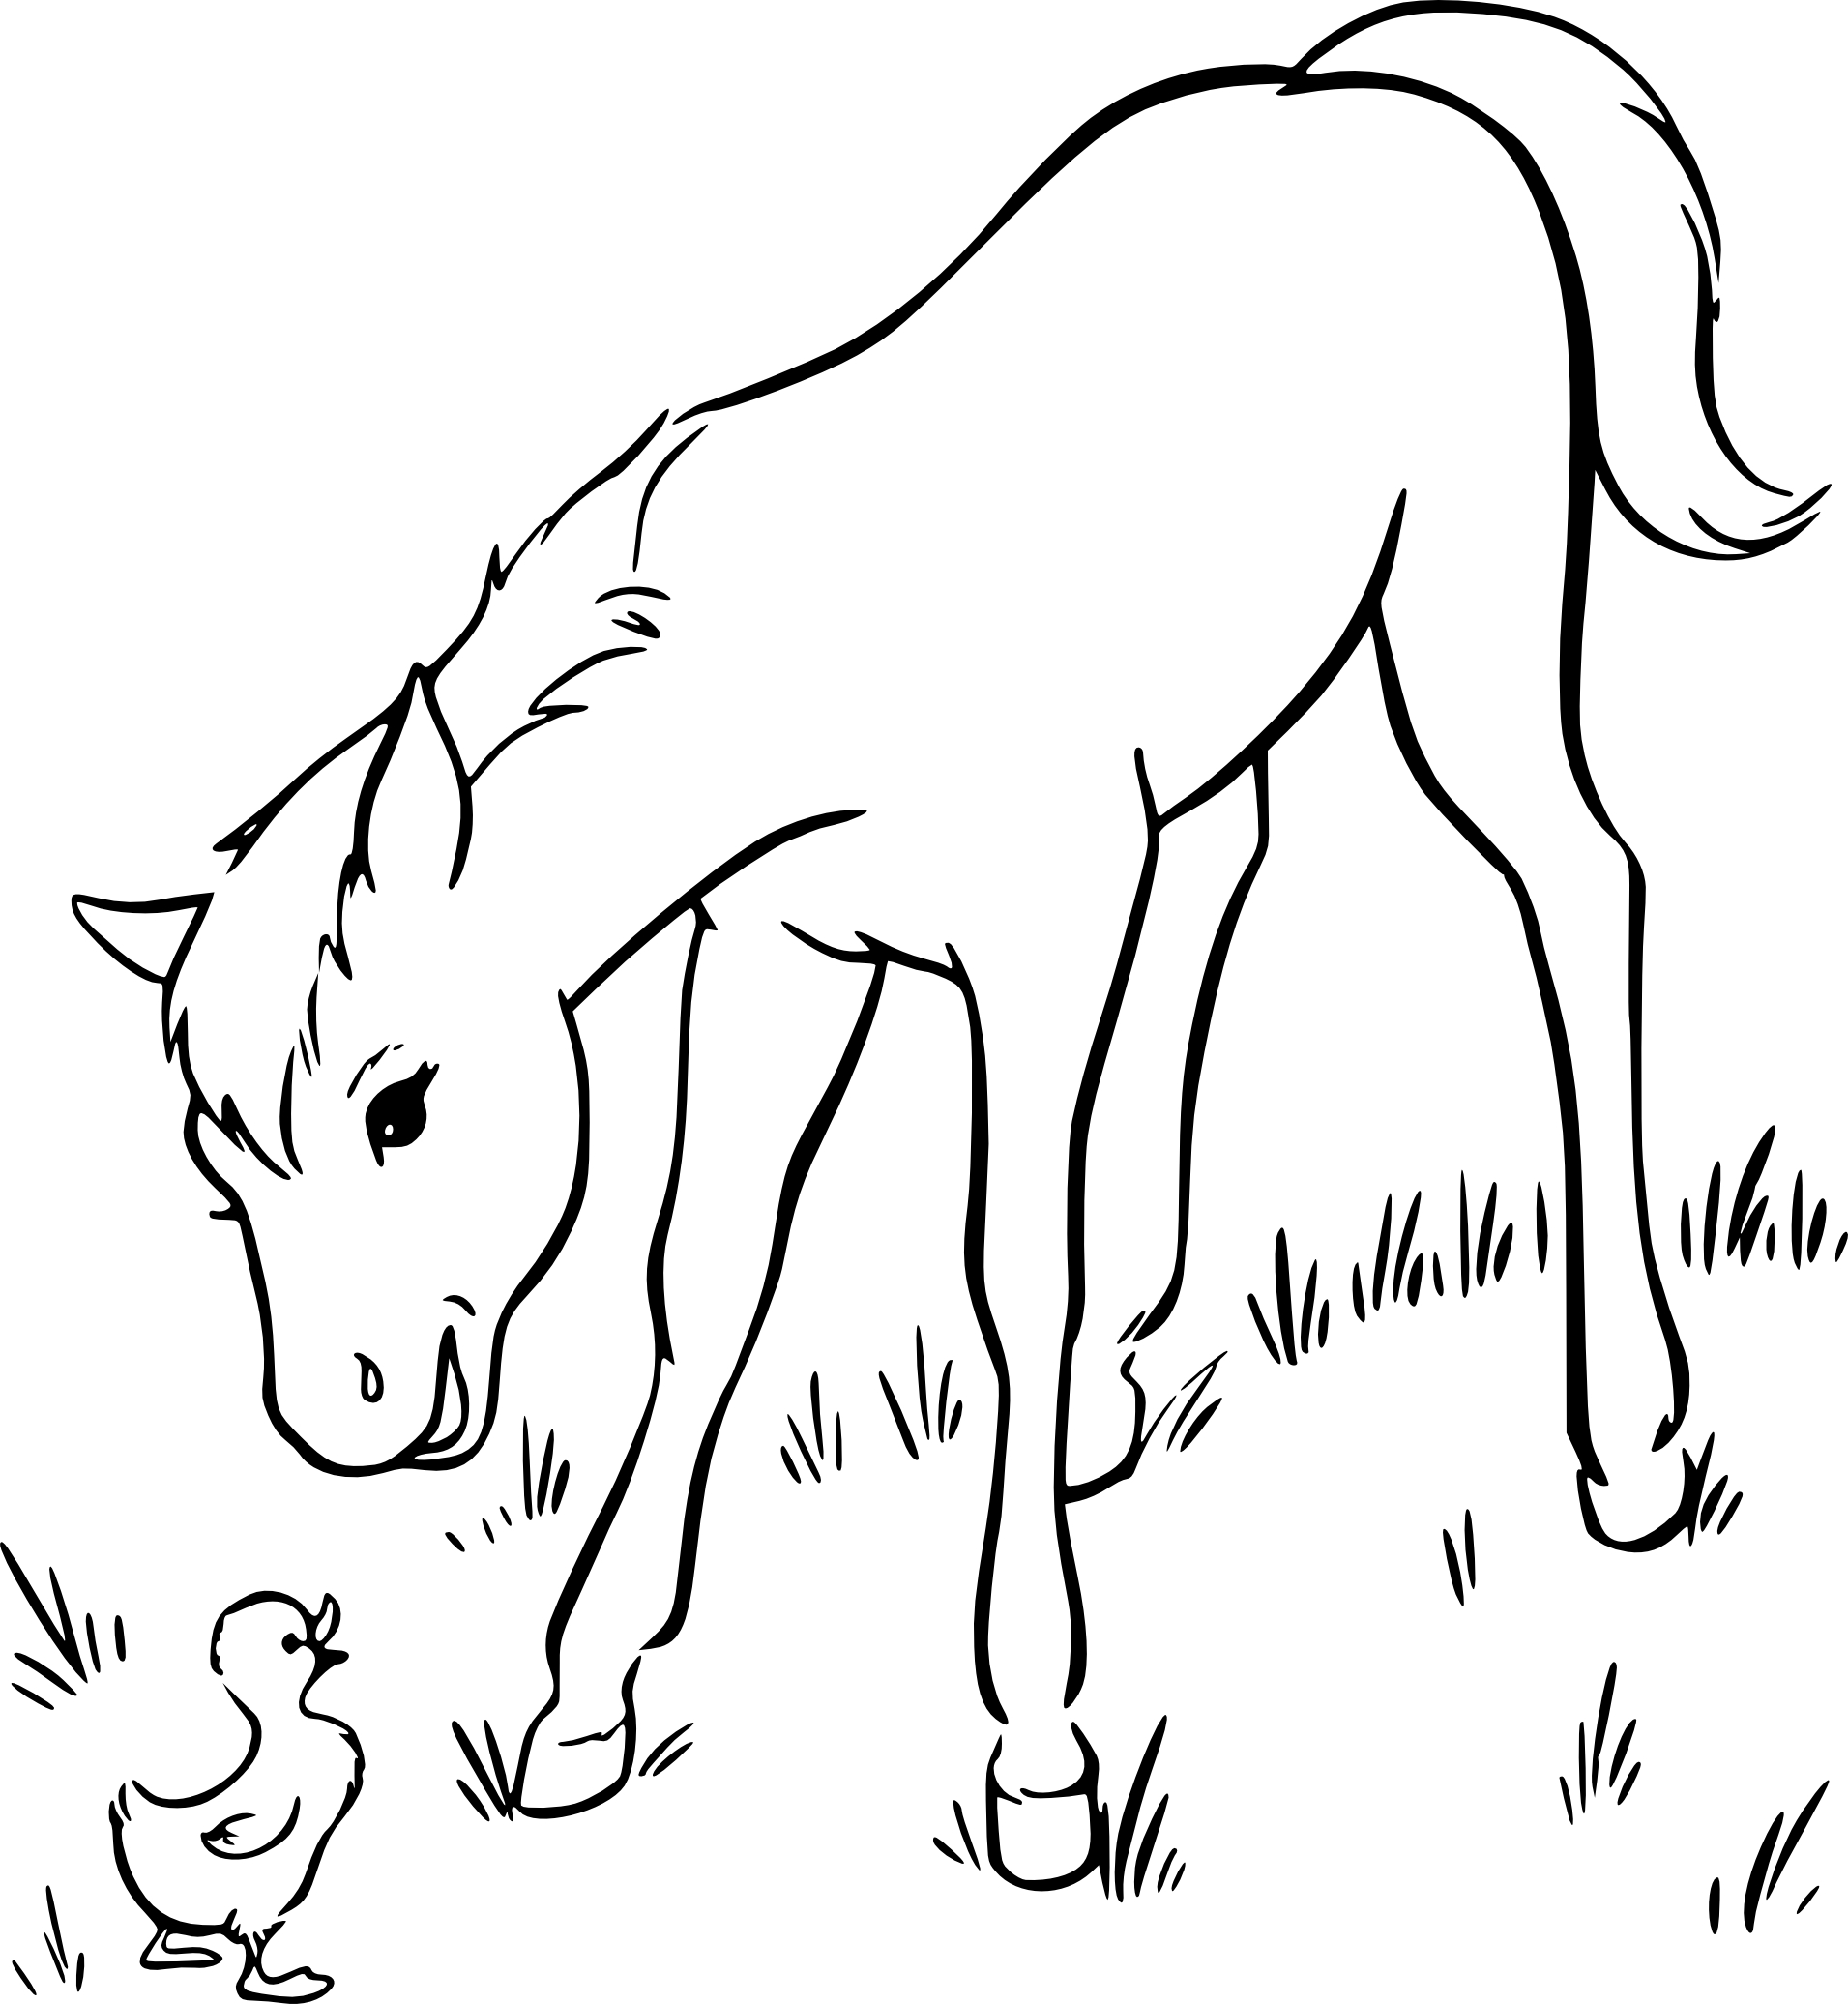 Foal And Duckling coloring page